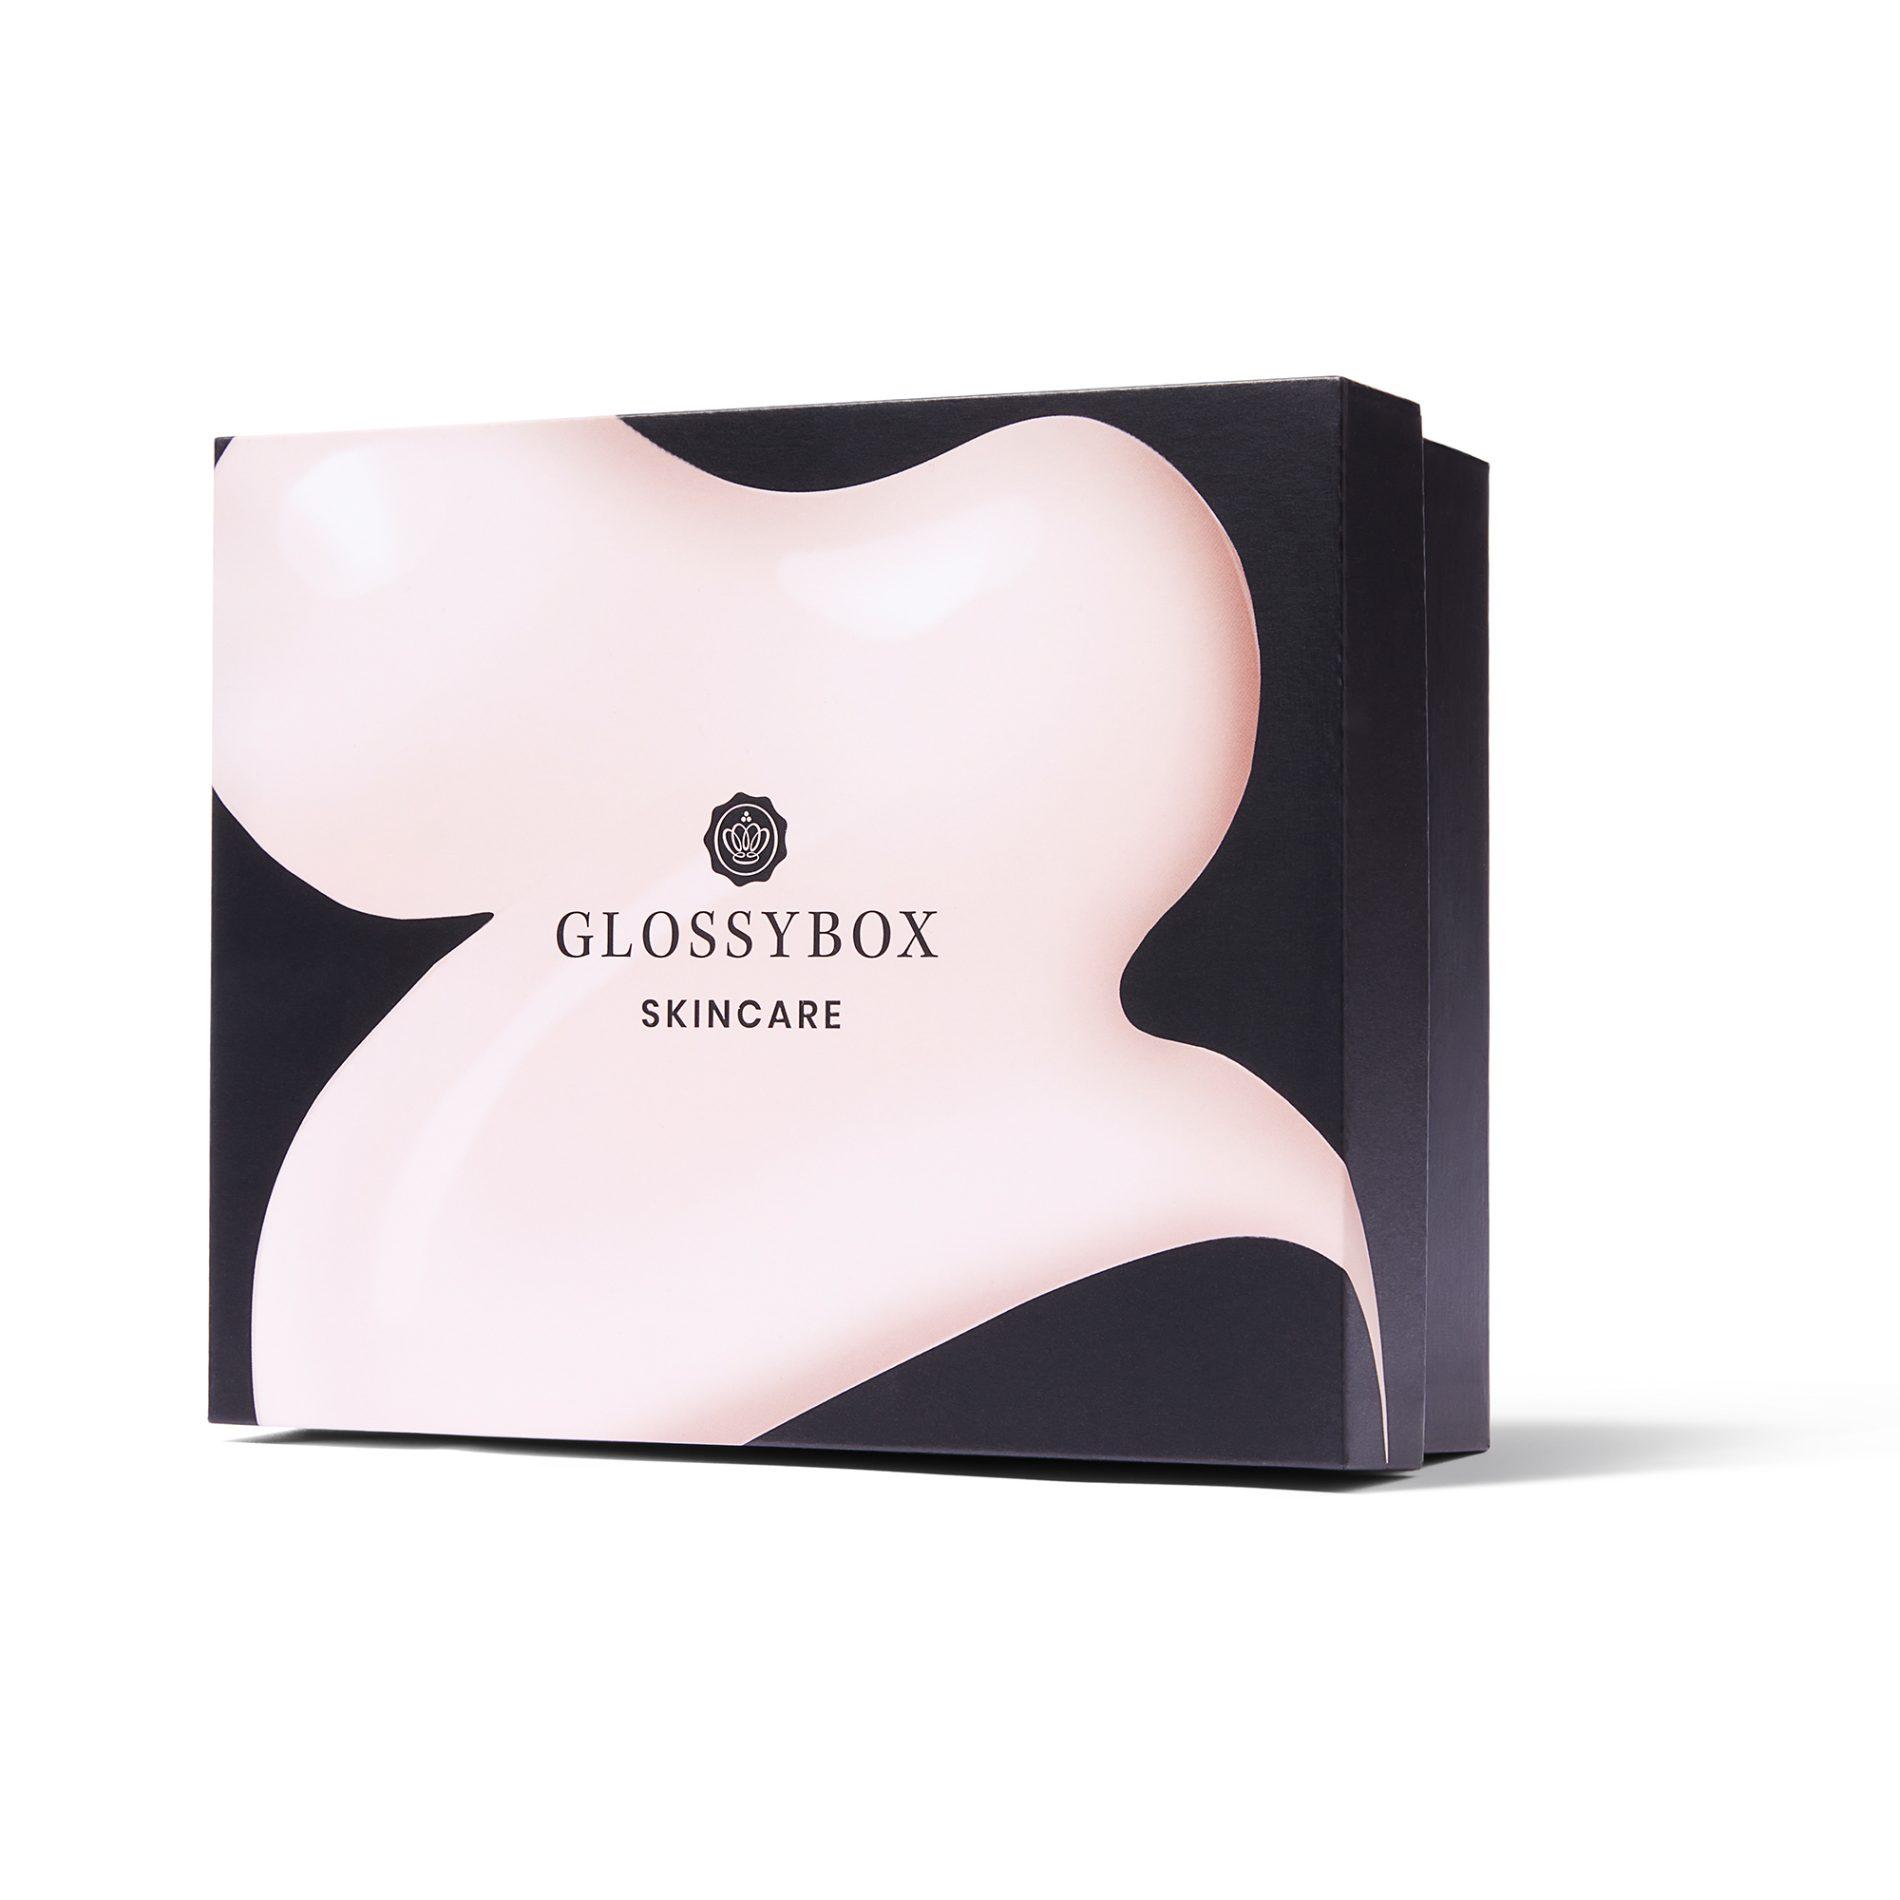 Read more about the article GLOSSYBOX Limited Edition Skincare Box – Coming Soon + Full Spoilers